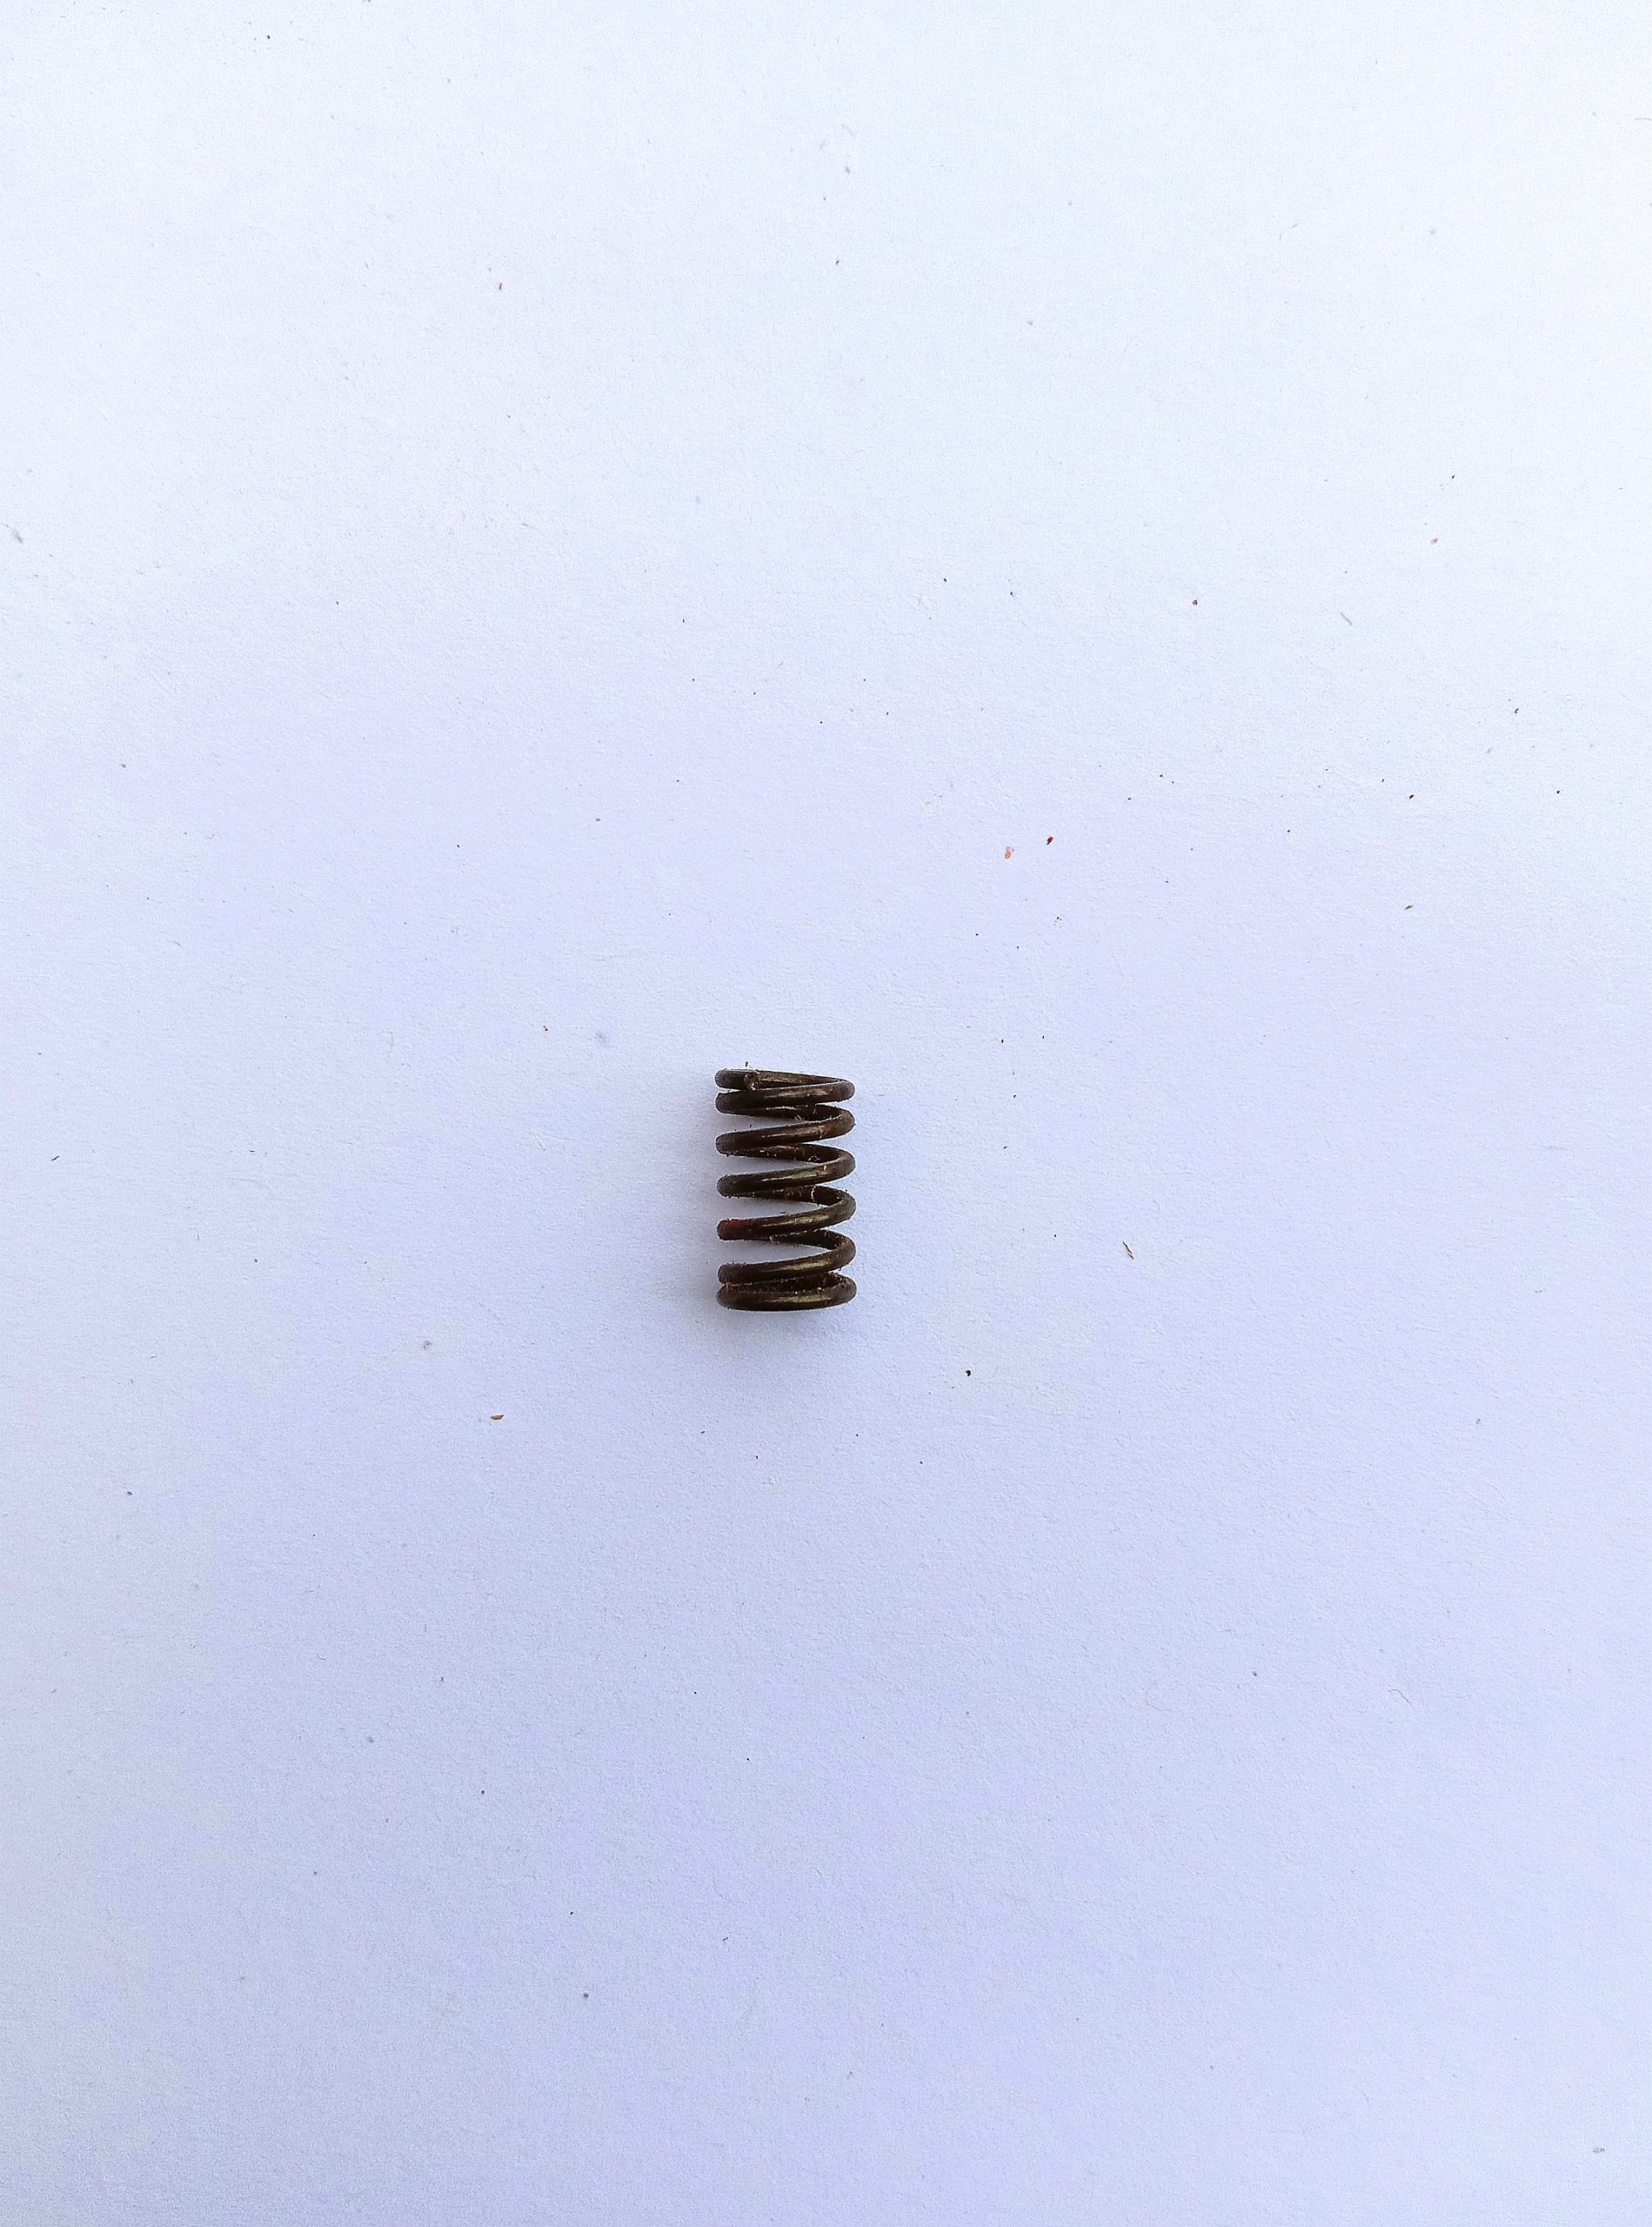 A small helical spring